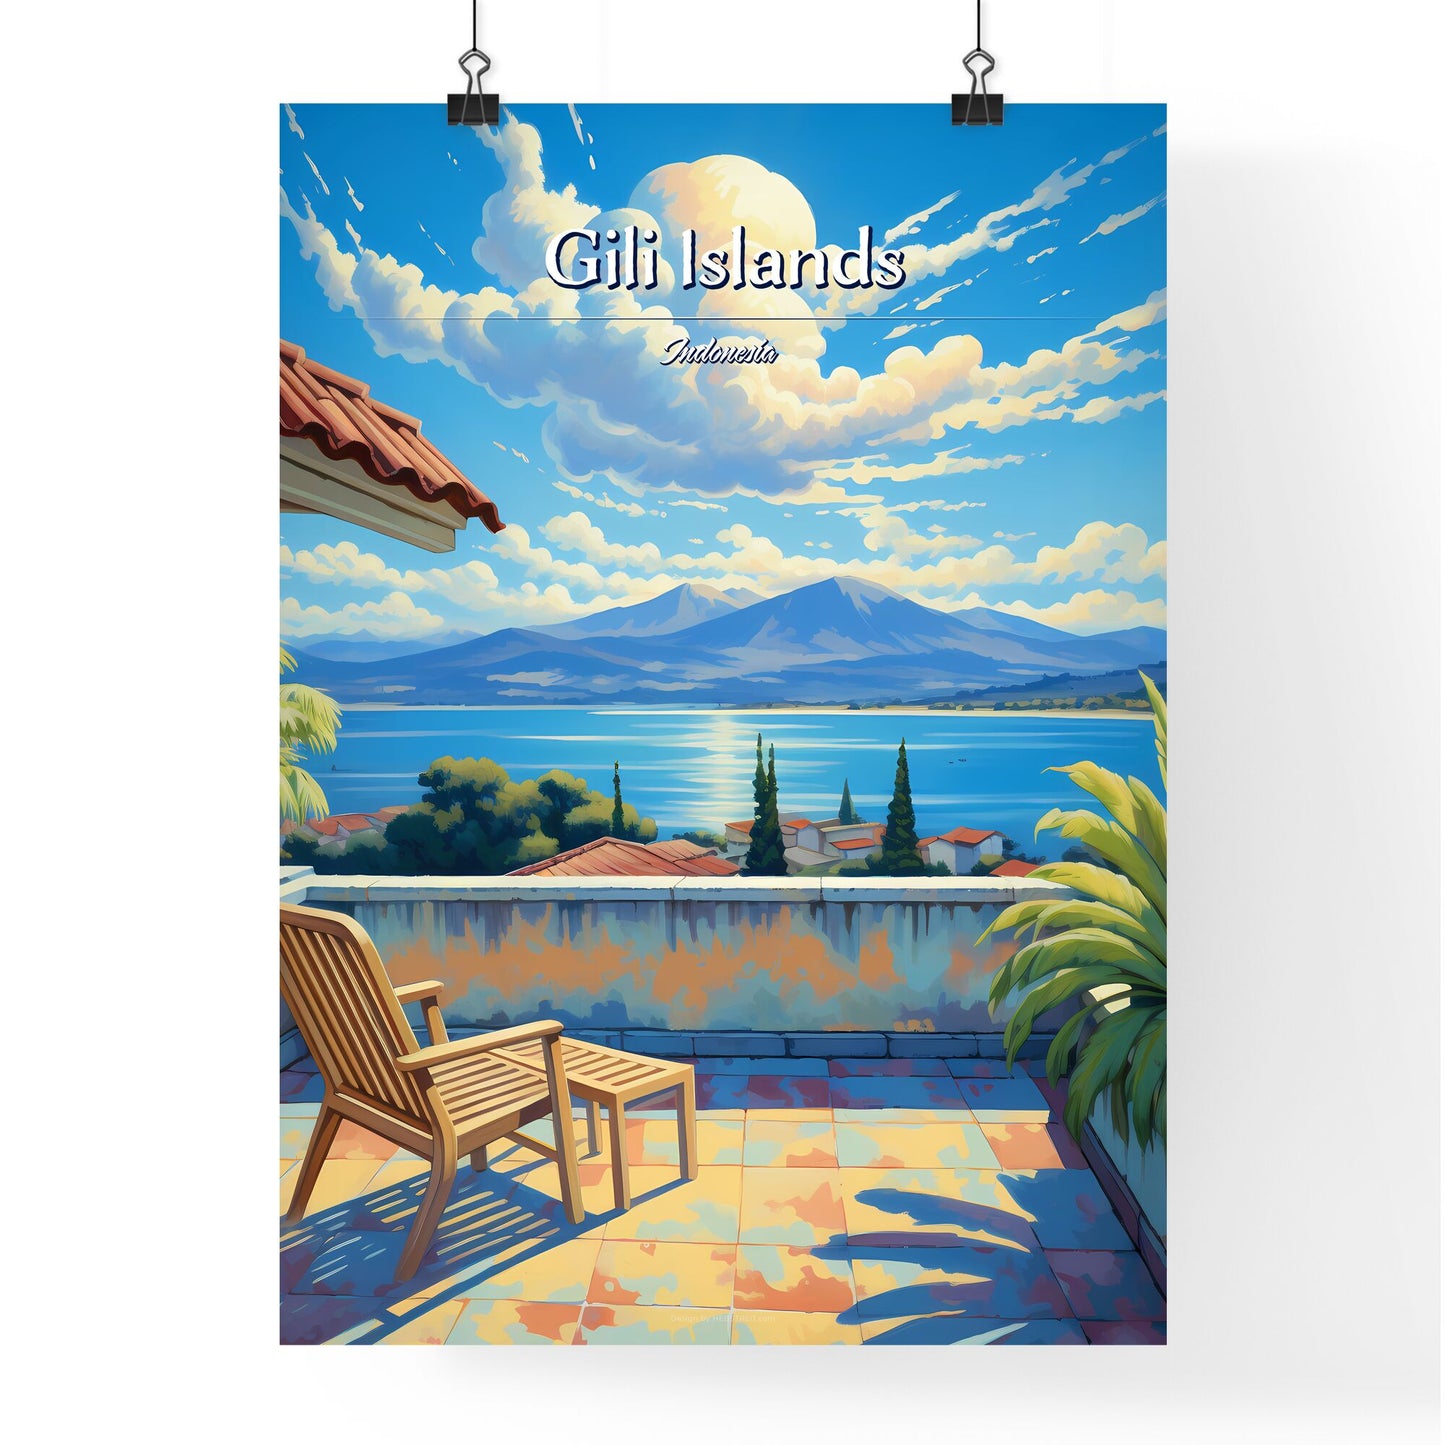 On the roofs of Gili Islands, Indonesia - Art print of a deck with chairs and a view of a lake and mountains Default Title